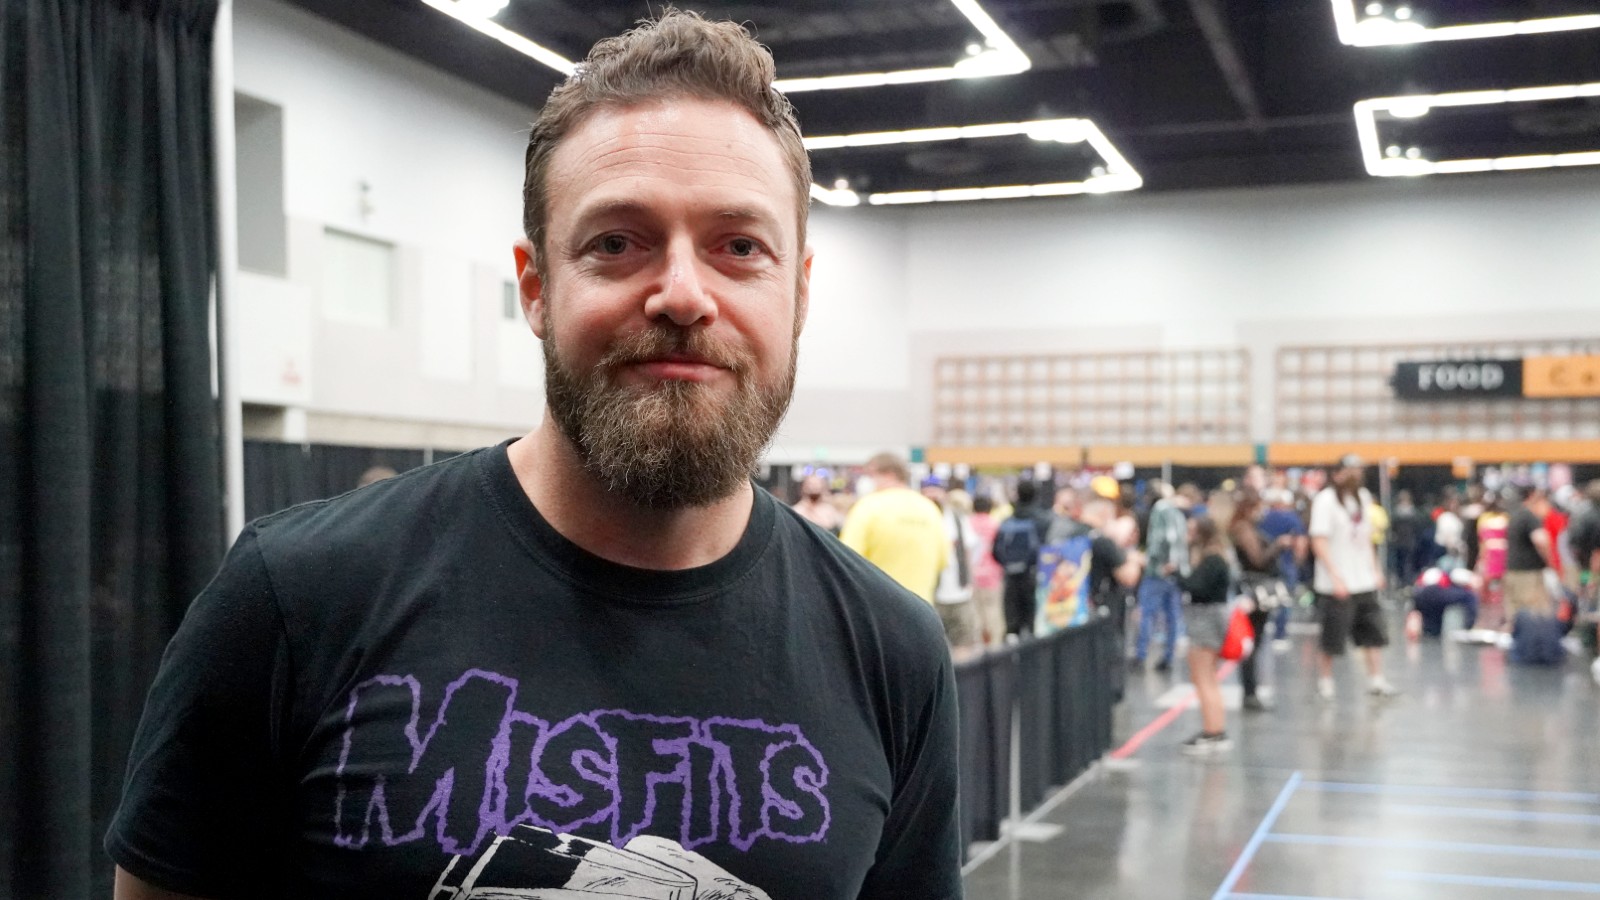 'The Walking Dead' star Ross Marquand stands in a convention hall to great fans.